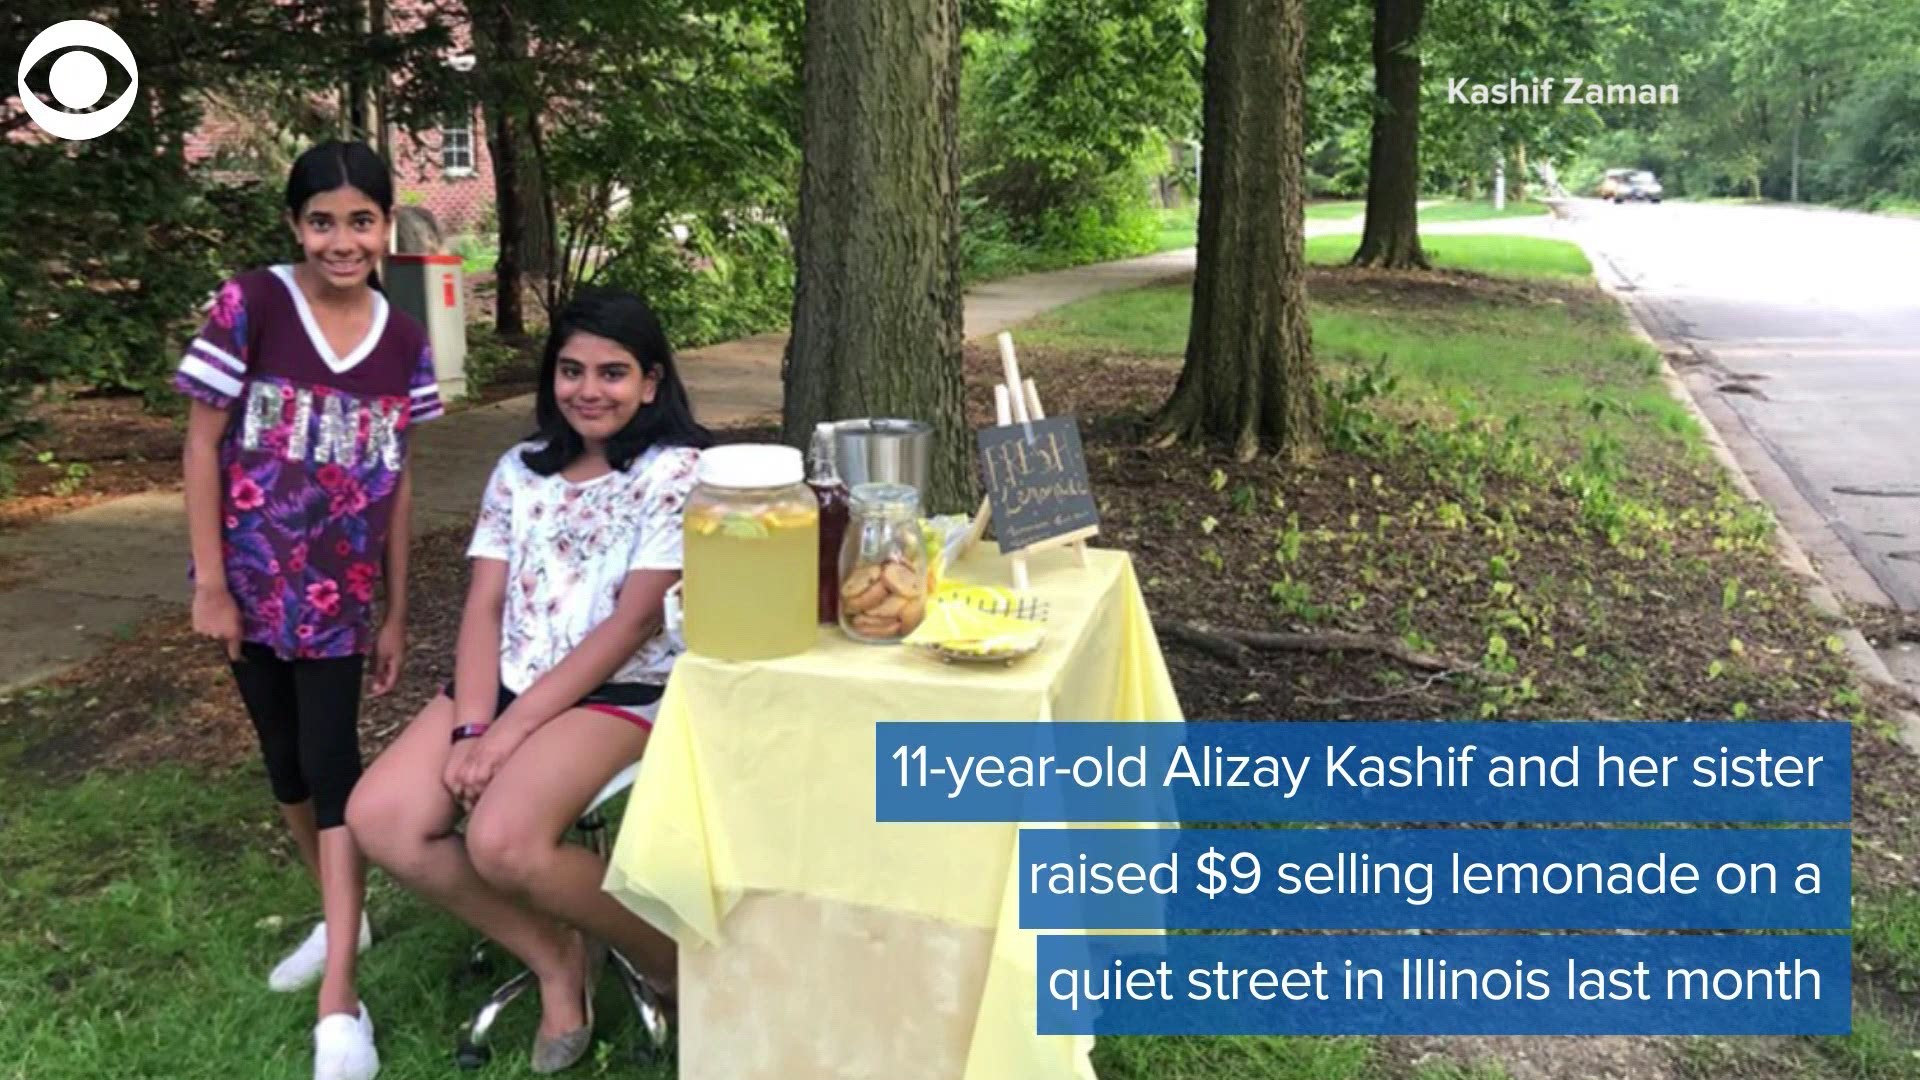 When life gives you lemons, make lemonade. That's what two girls who were trying to raise money for charity did. Take a look at how the Naperville Police Department helped out.